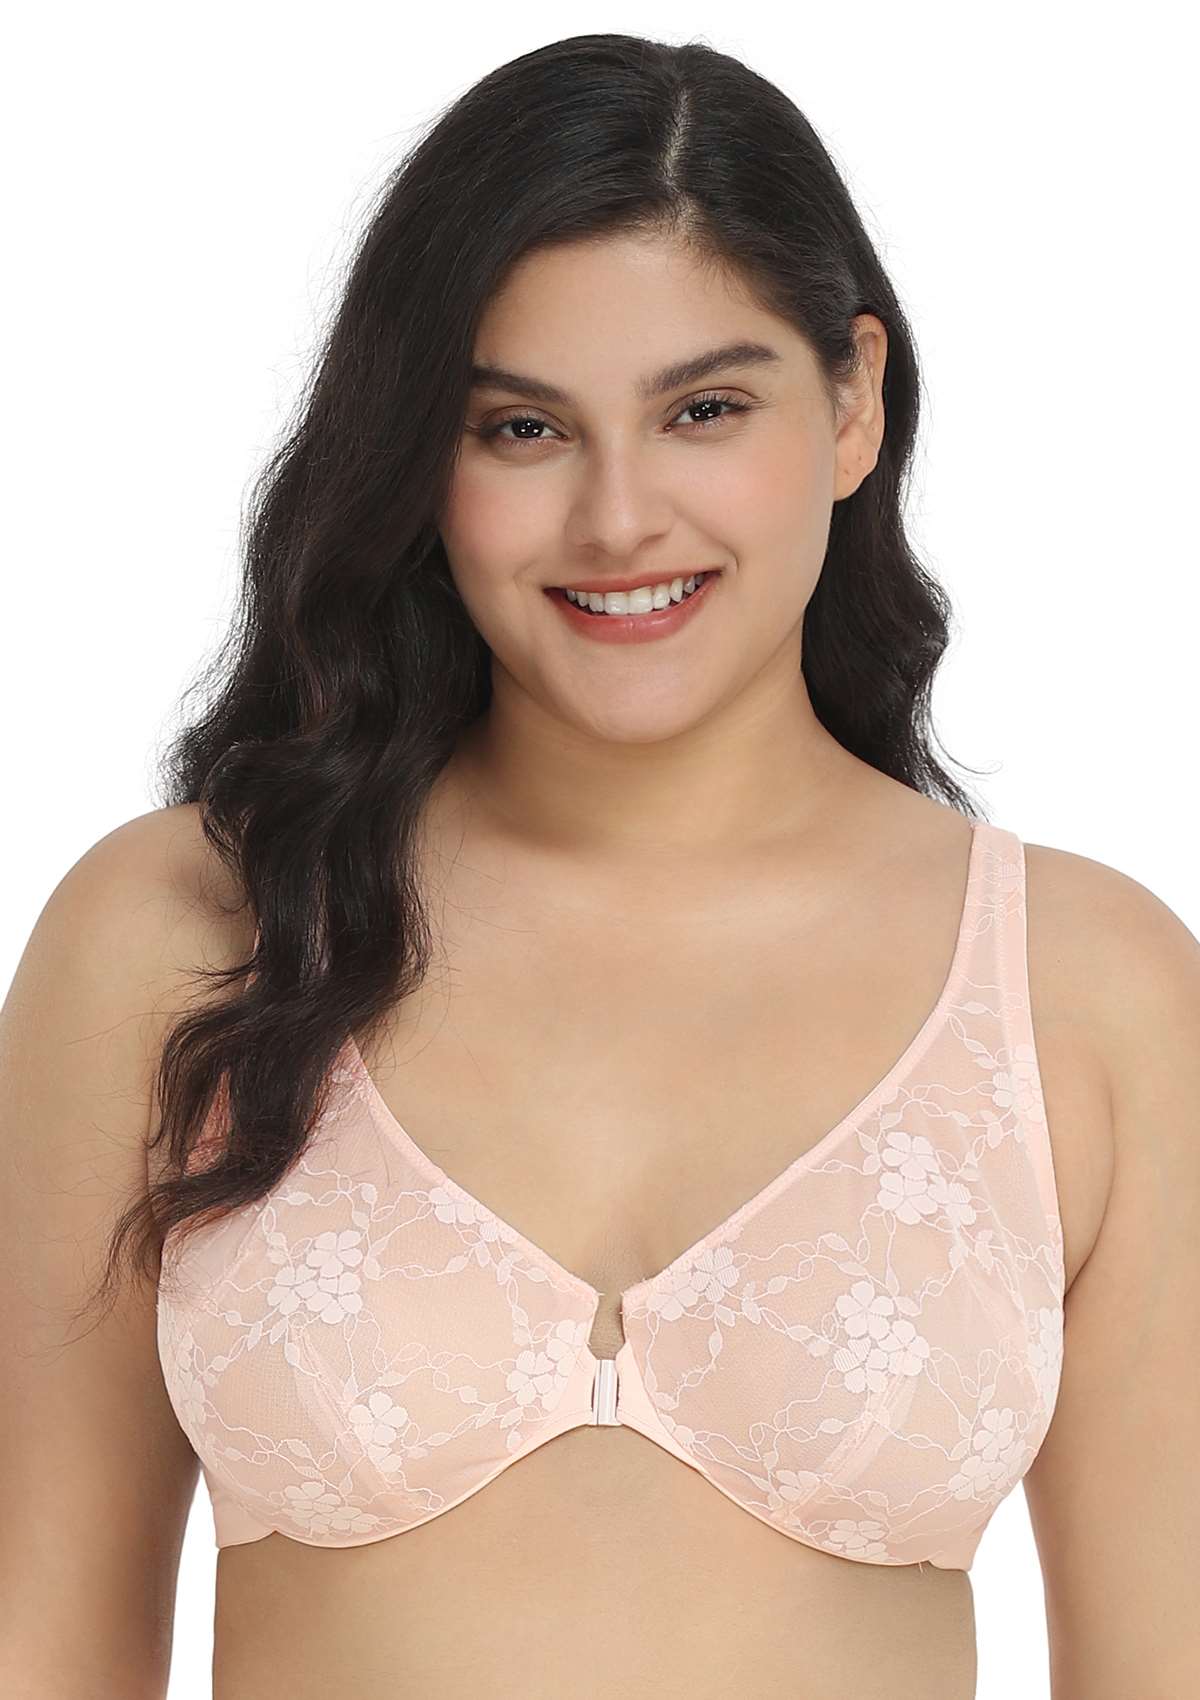 HSIA Spring Romance Front-Close Floral Lace Unlined Full Coverage Bra - White / 34 / G